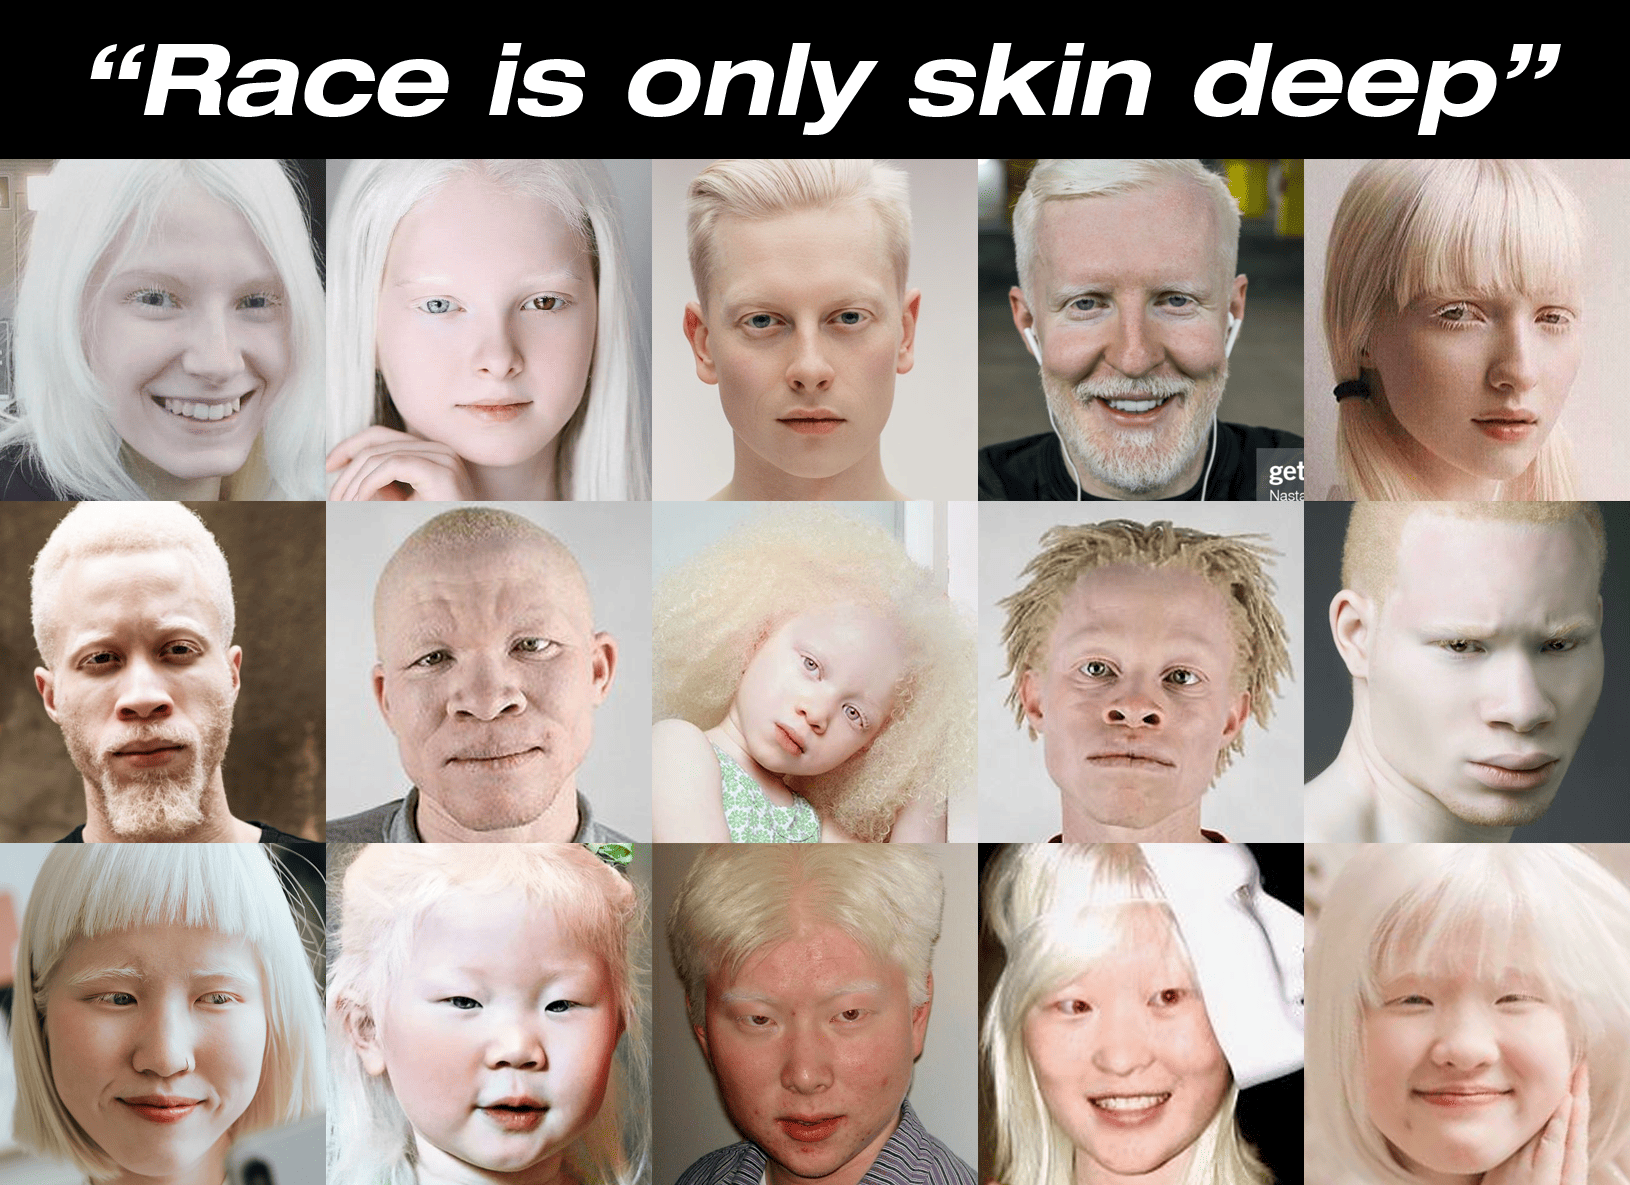 Albino people all have the same skin color, and yet it's still easy to determine which race an albino person belongs to.